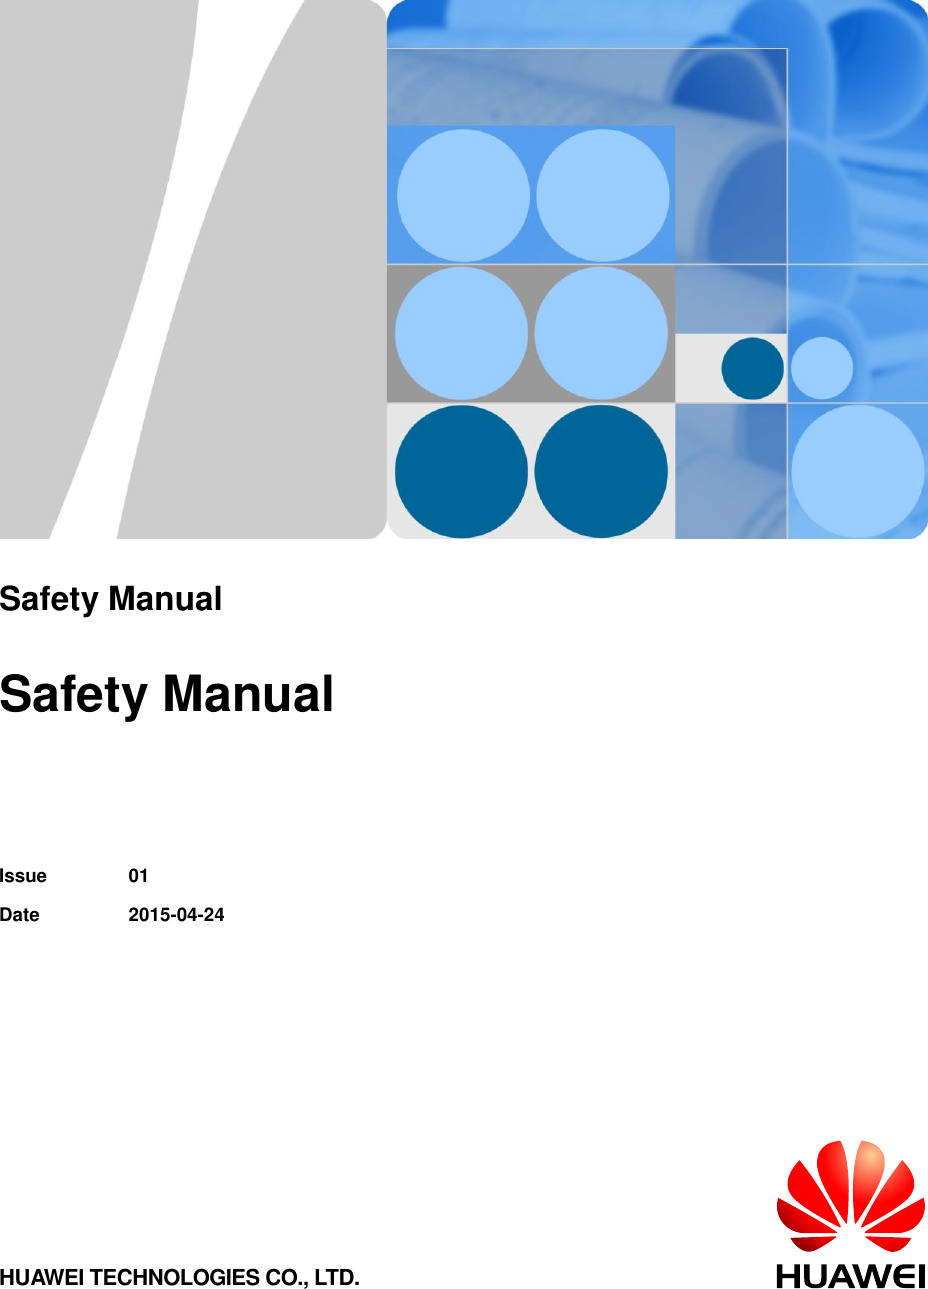         Safety Manual  Safety Manual   Issue 01 Date 2015-04-24 HUAWEI TECHNOLOGIES CO., LTD. 